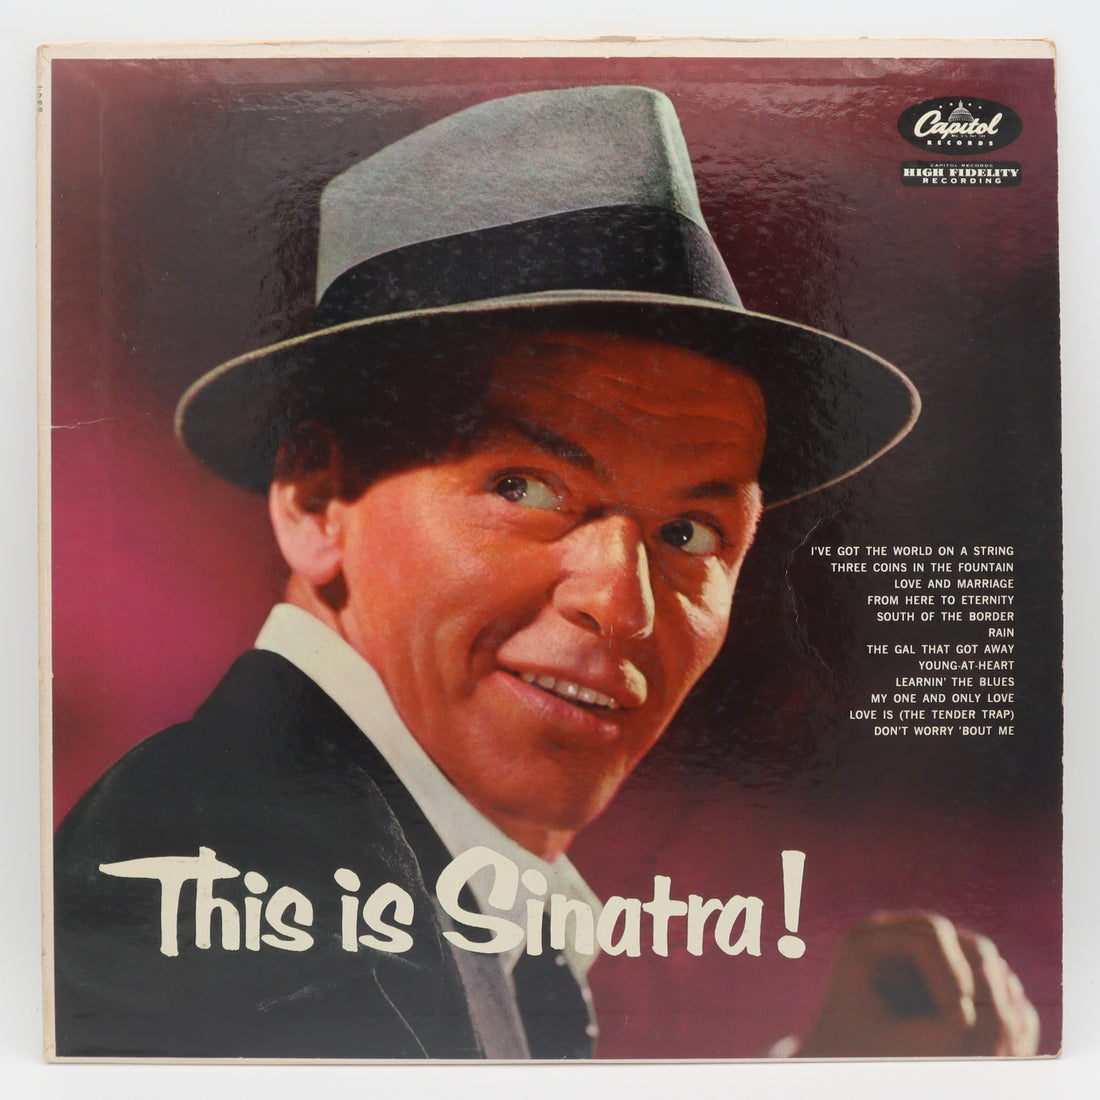 This is Sinatra!